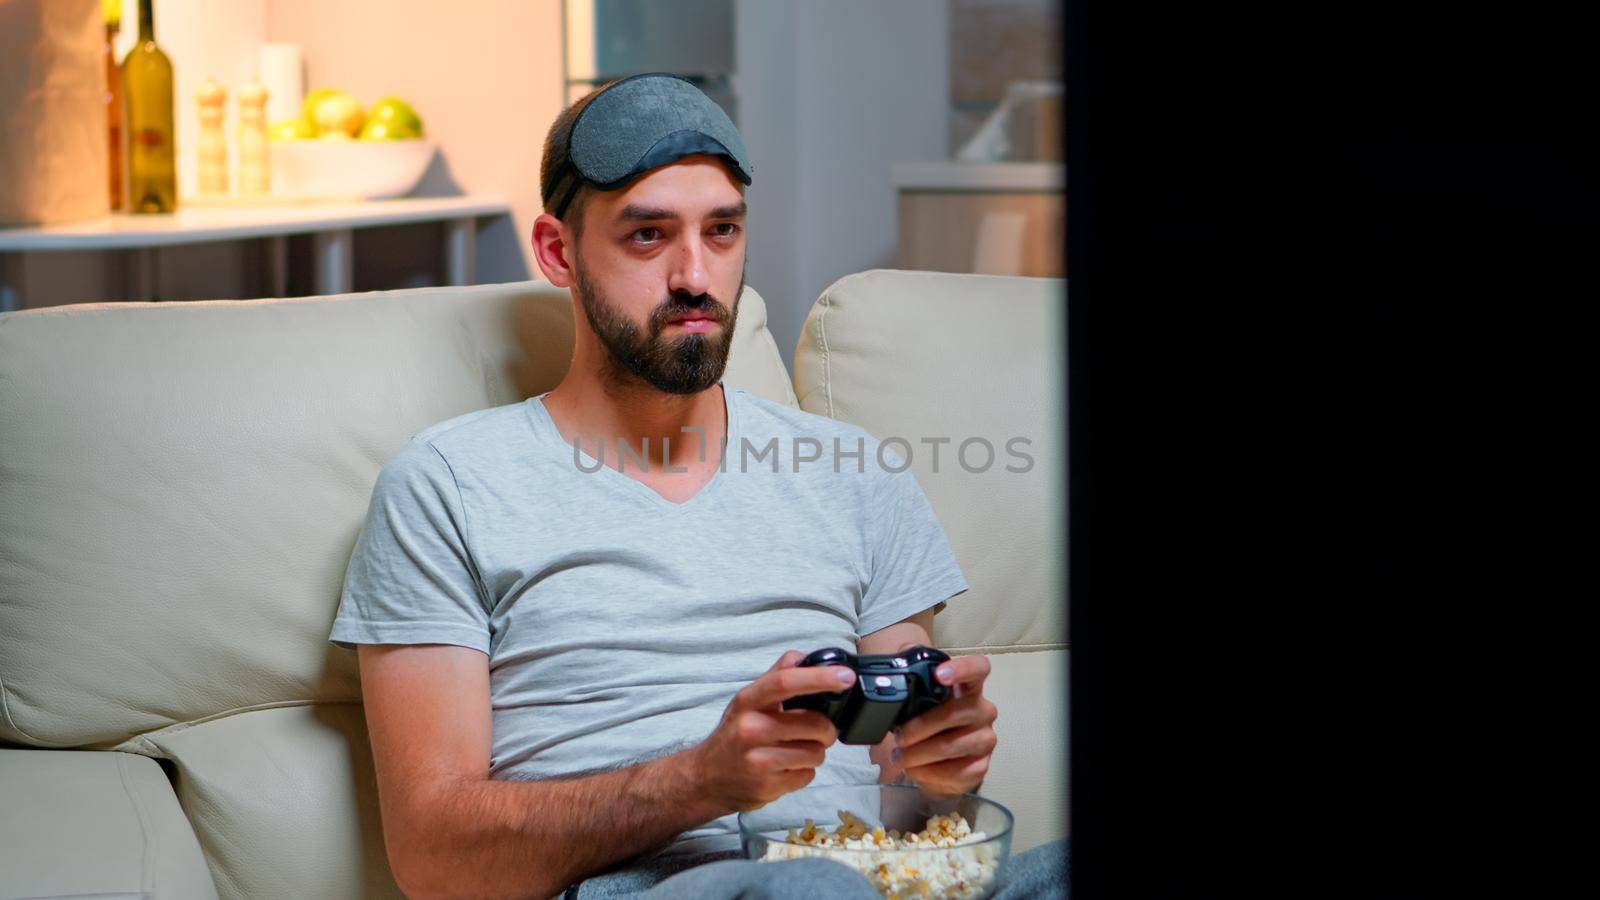 Close up of man with eye sleep mask playing videogames with joystick for gaming competition. Caucasian male sitting in front on television on sofa late at night in kitchen